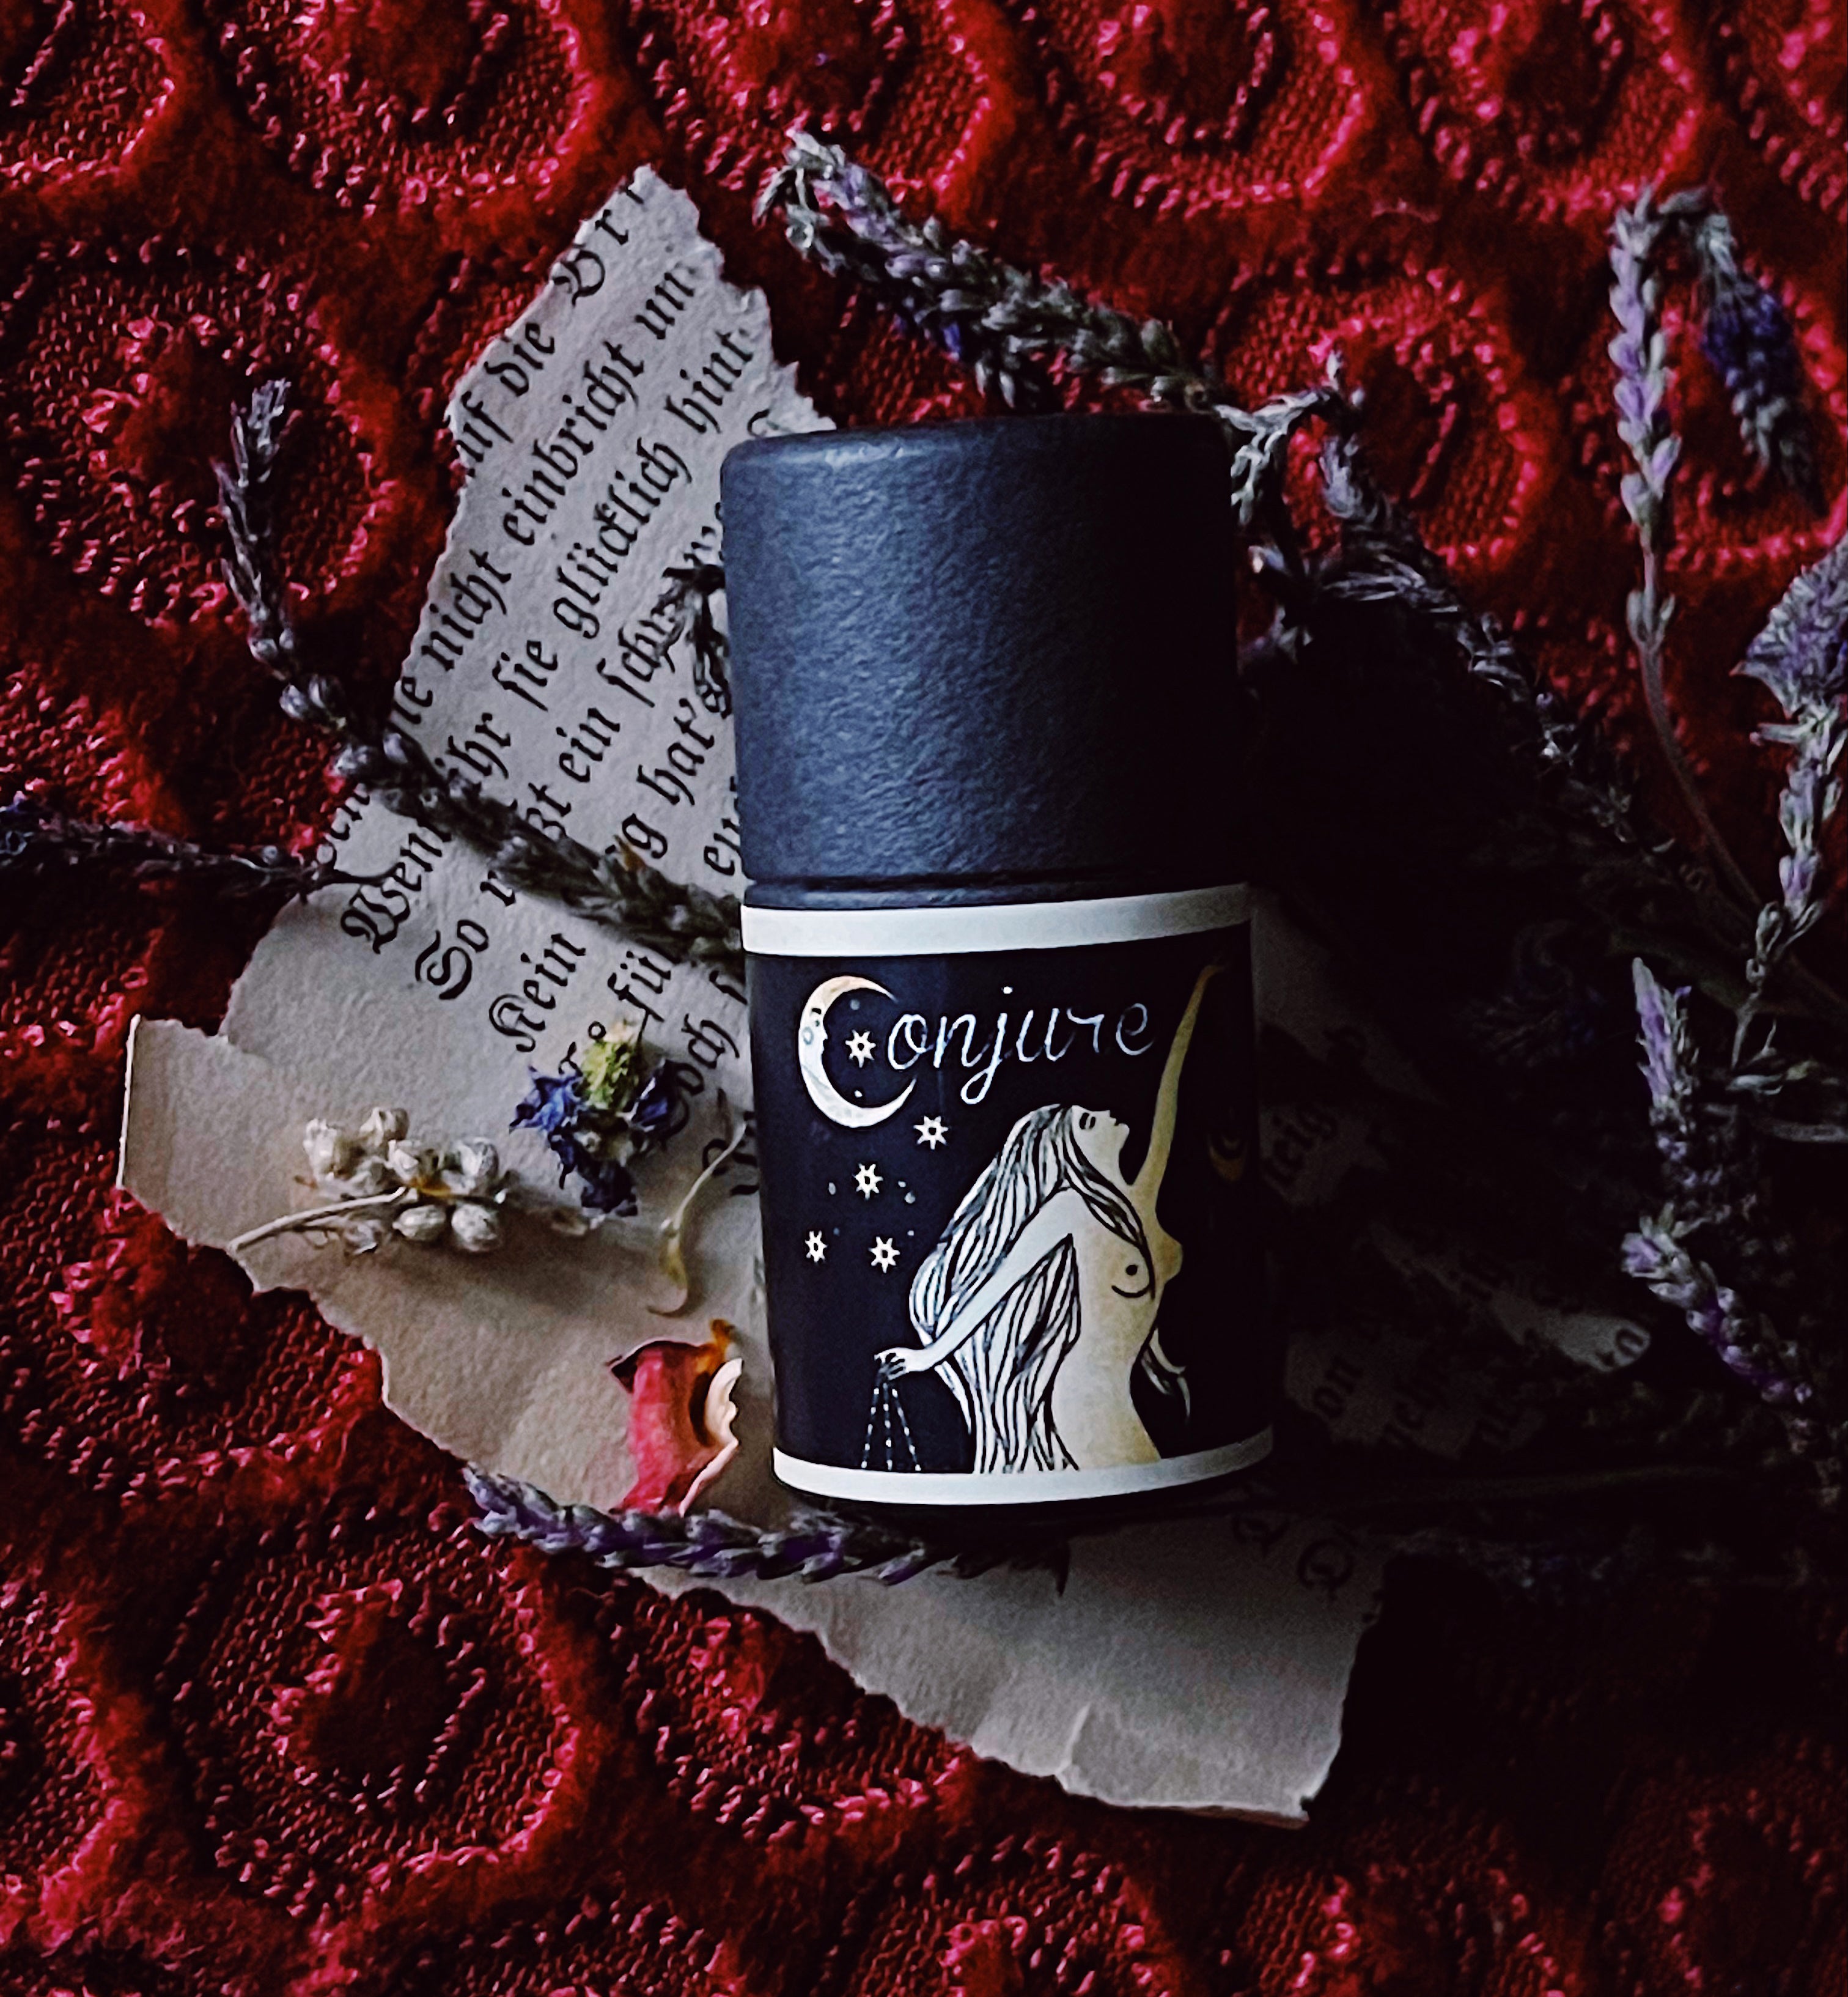 Conjure Solid Perfume